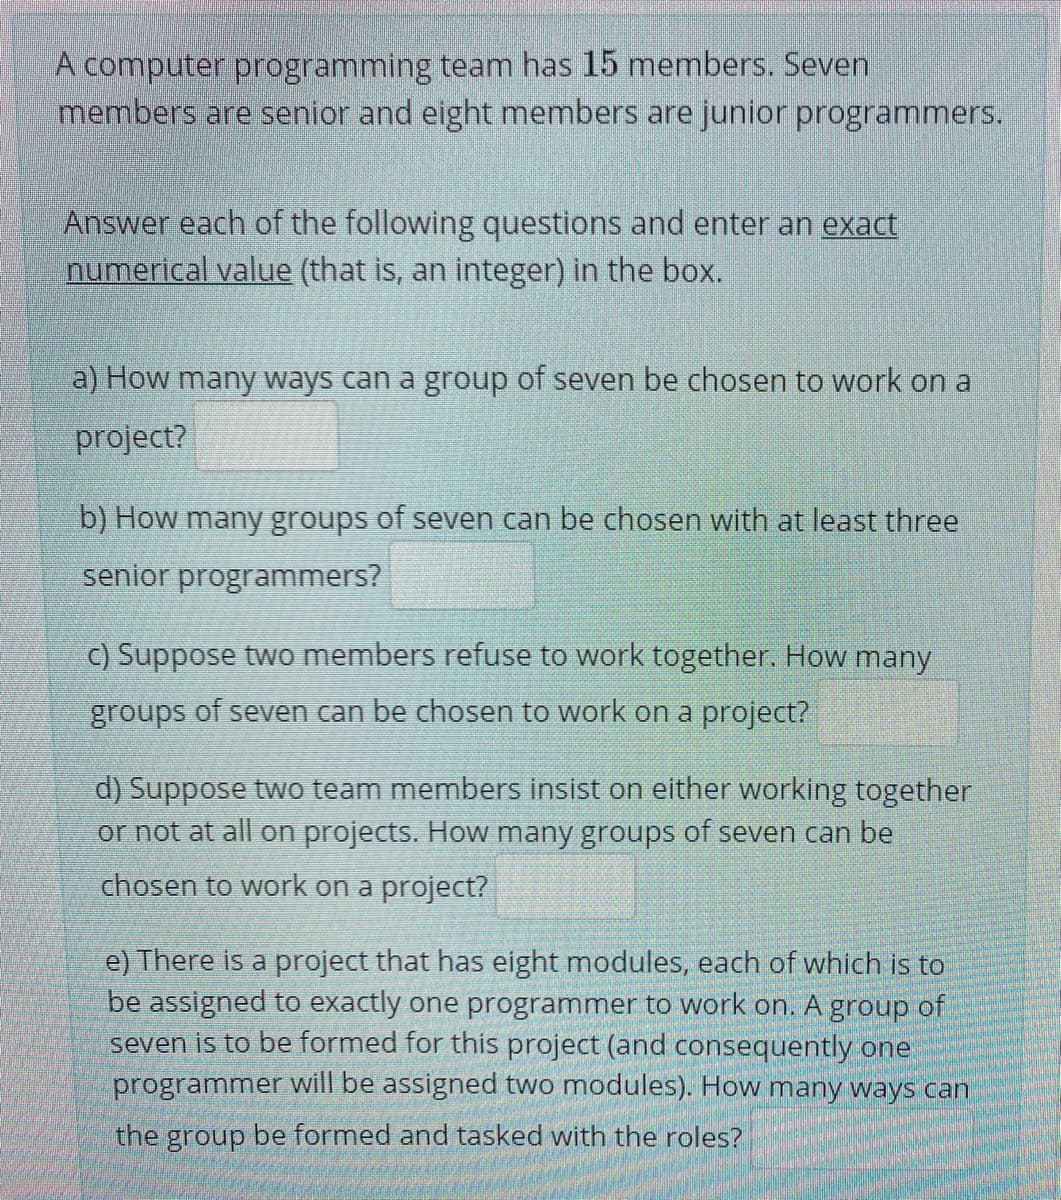 A computer programming team has 15 members. Seven
members are senior and eight members are junior programmers.
Answer each of the following questions and enter an exact
numerical value (that is, an integer) in the box.
a) How many ways can a group of seven be chosen to work on a
project?
b) How many groups of seven can be chosen with at least three
senior programmers?
C) Suppose two members refuse to work together. How many
groups of seven can be chosen to work on a project?
d) Suppose two team members insist on either working together
or not at all on projects. How many groups of seven can be
chosen to work on a project?
e) There is a project that has eight modules, each of which is to
be assigned to exactly one programmer to work on. A group of
seven is to be formed for this project (and consequently one
programmer will be assigned two modules). How many ways can
the group be formed and tasked with the roles?
